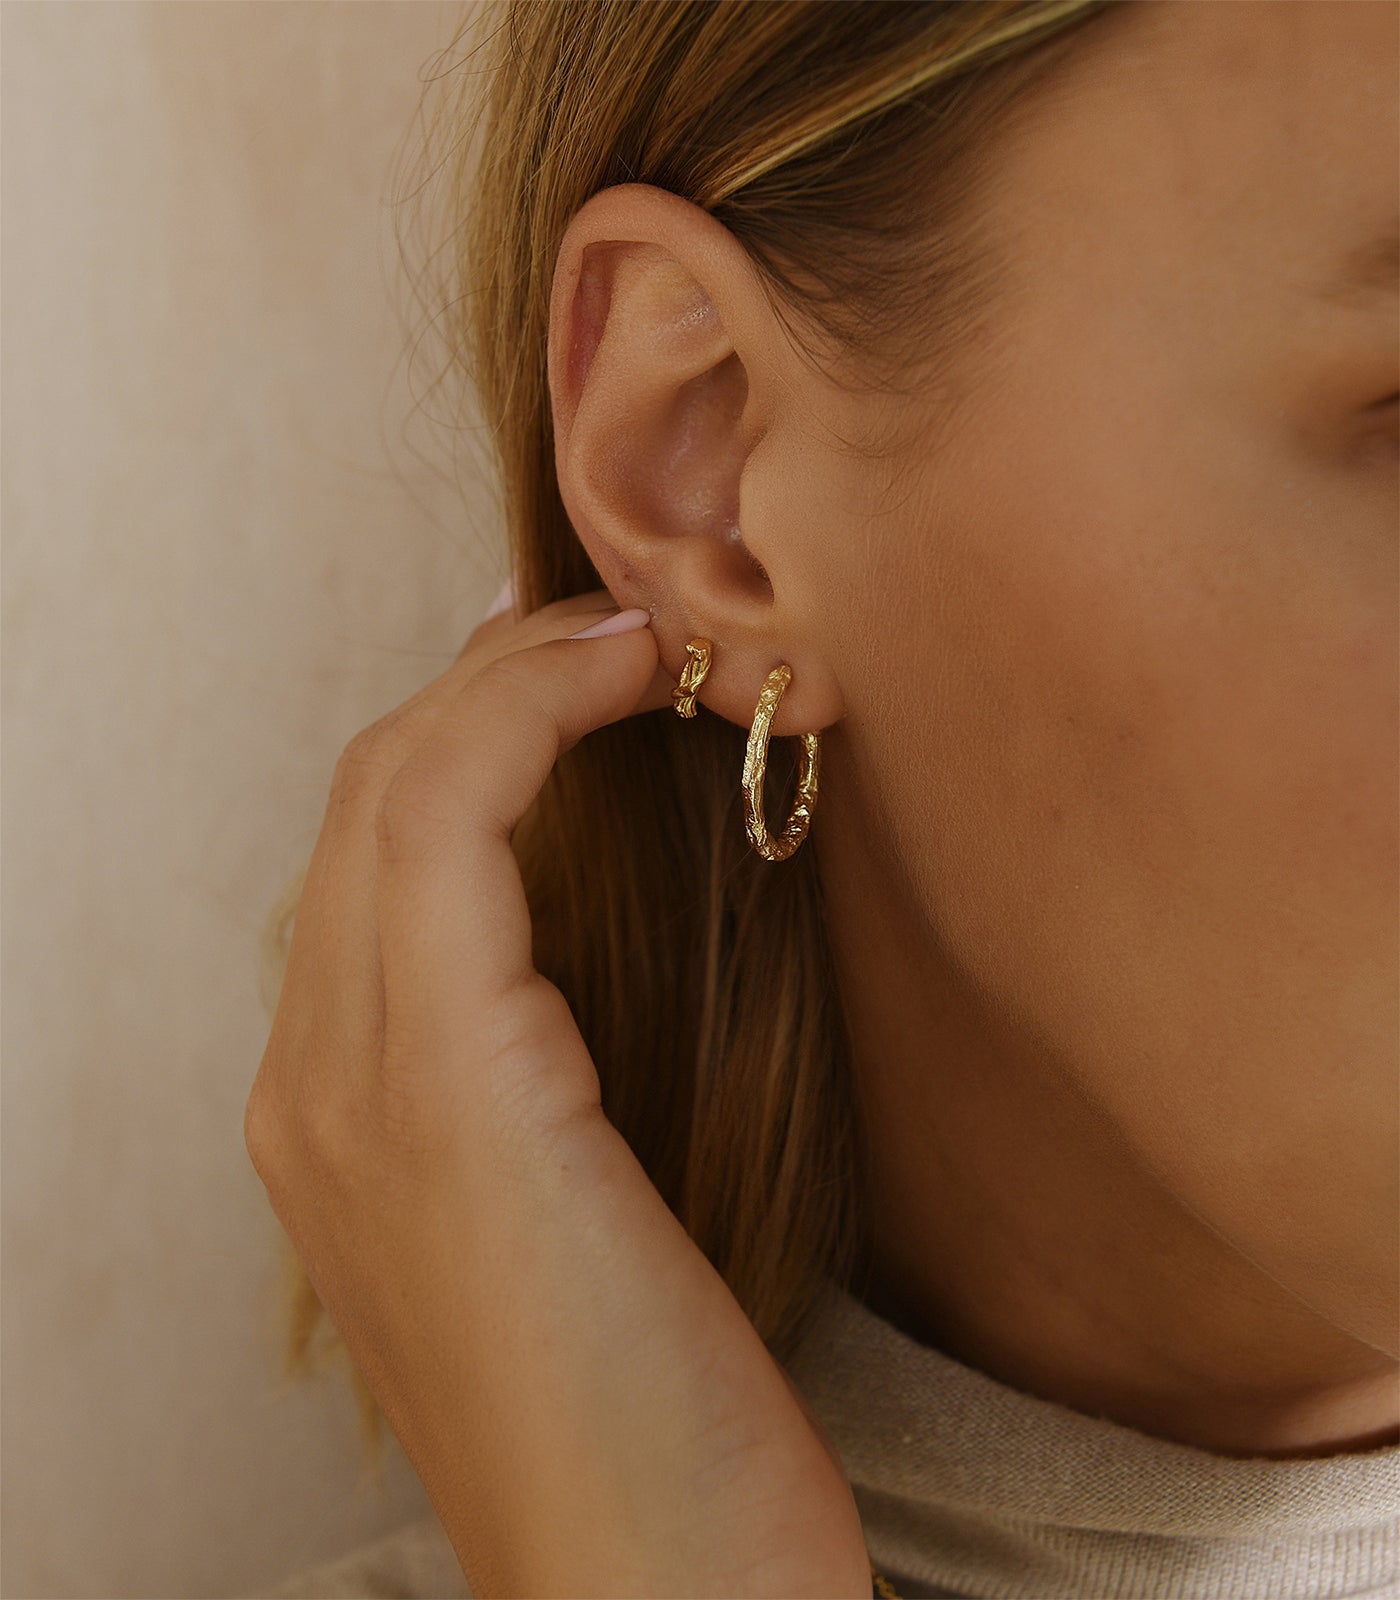 A gold vermeil textured hoop earring paired with a small gold vermeil stud earring resembling a tree branch.